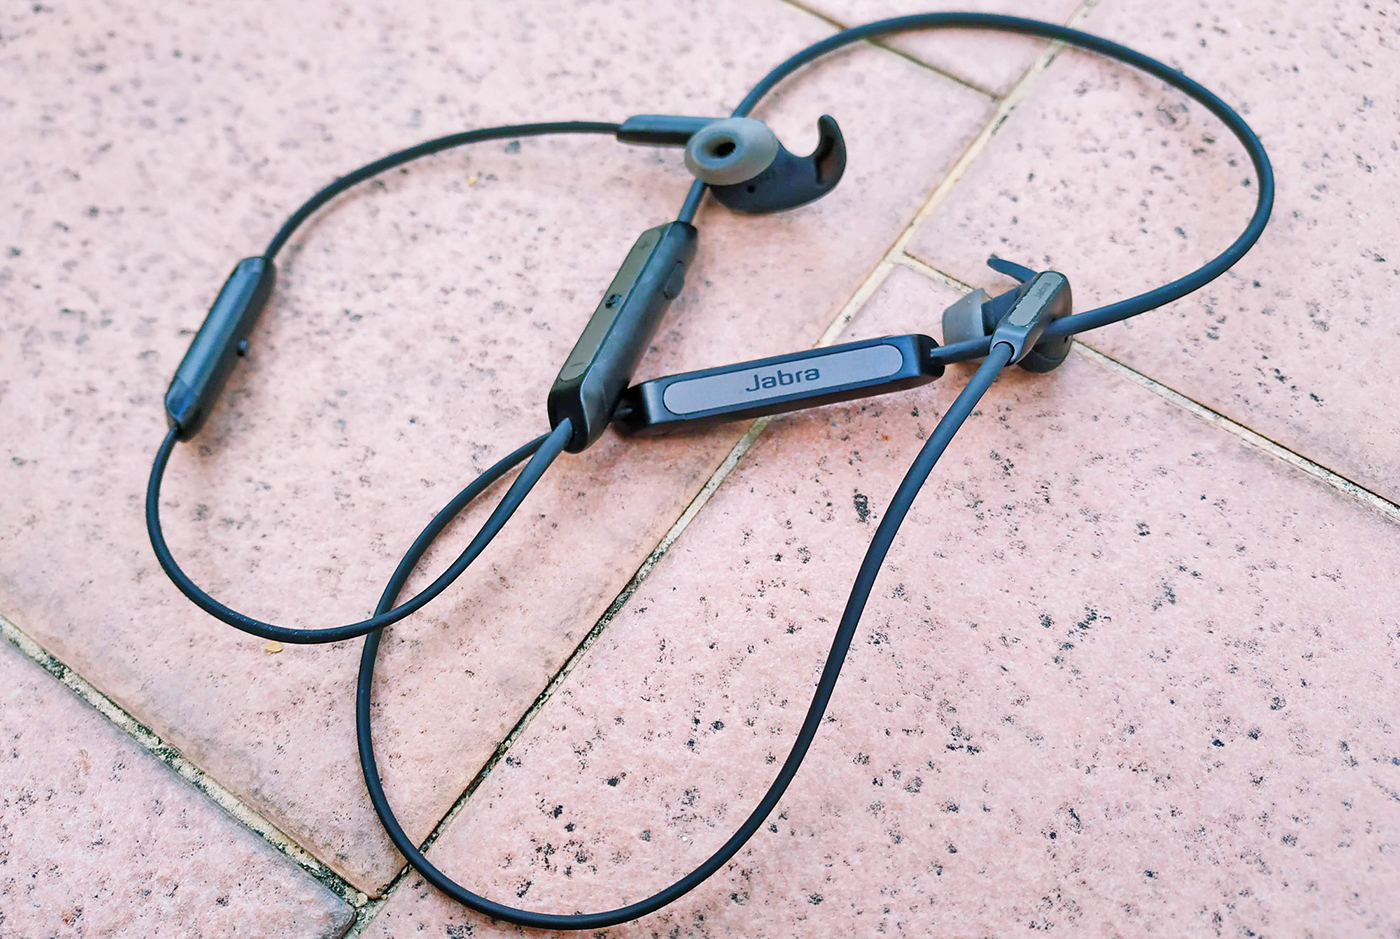 Review: Jabra Elite 45e: Cut the cords and get exercising